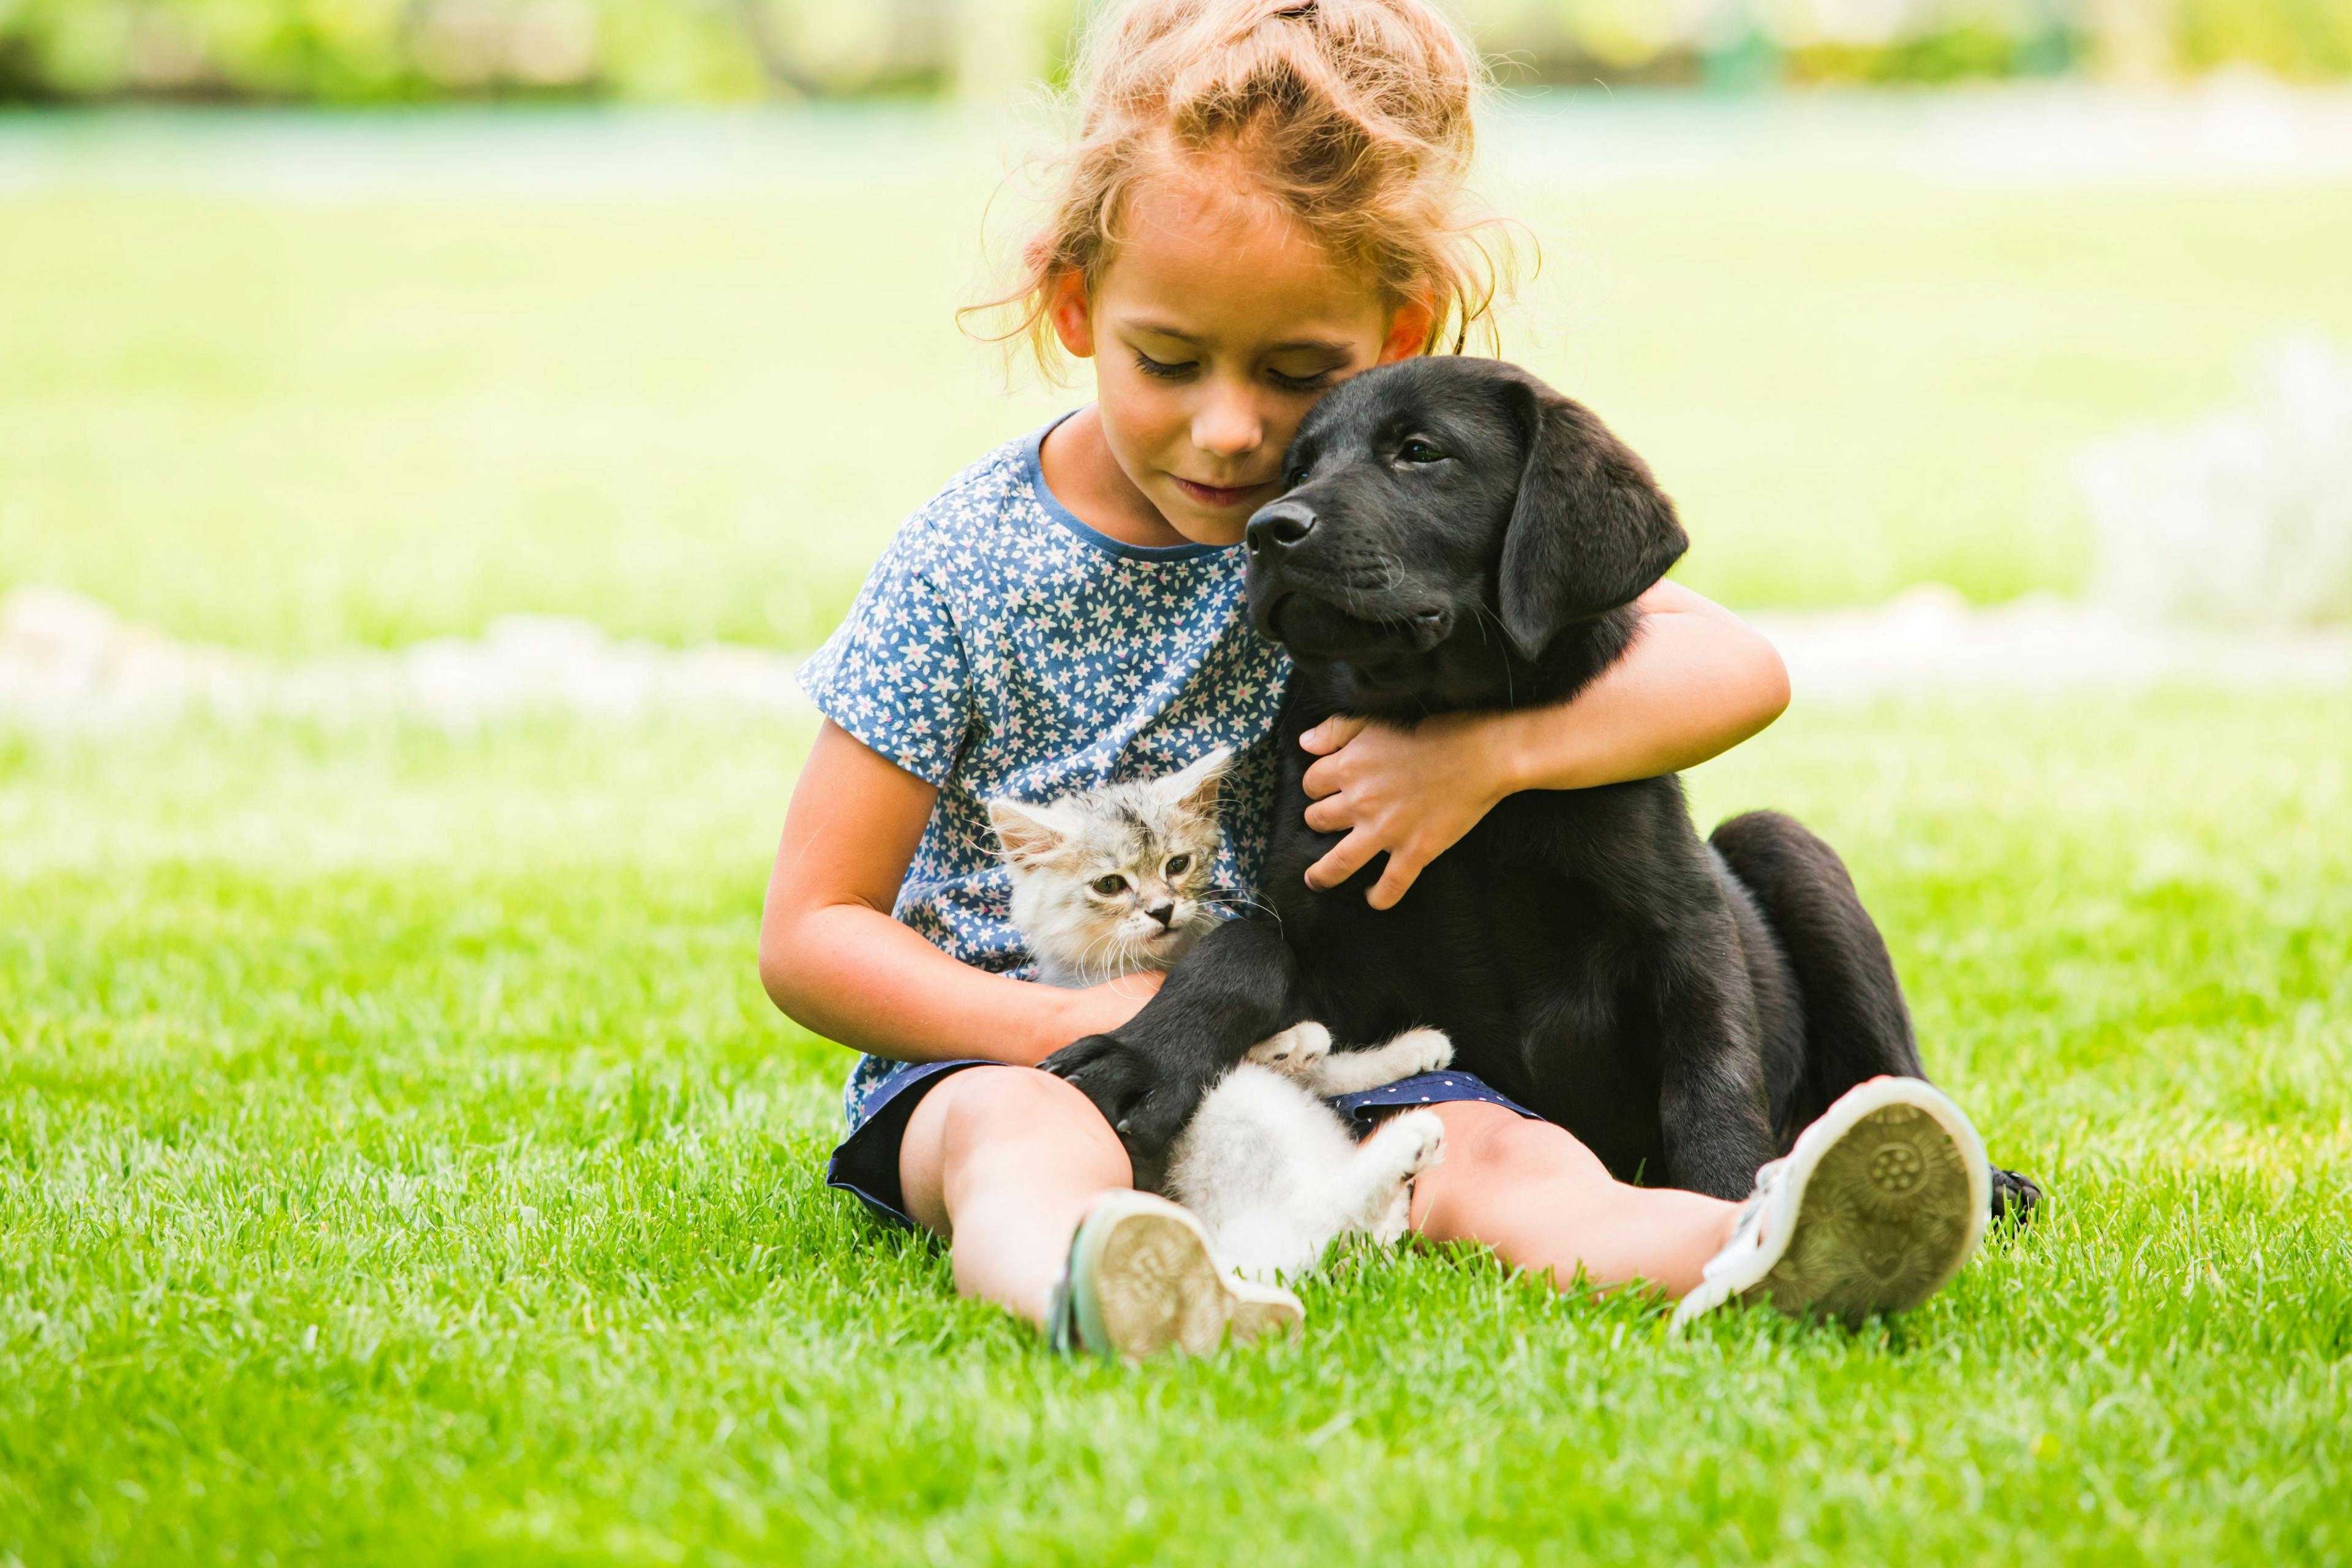 New poll finds 8 in 10 adopters consider it the most rewarding experience